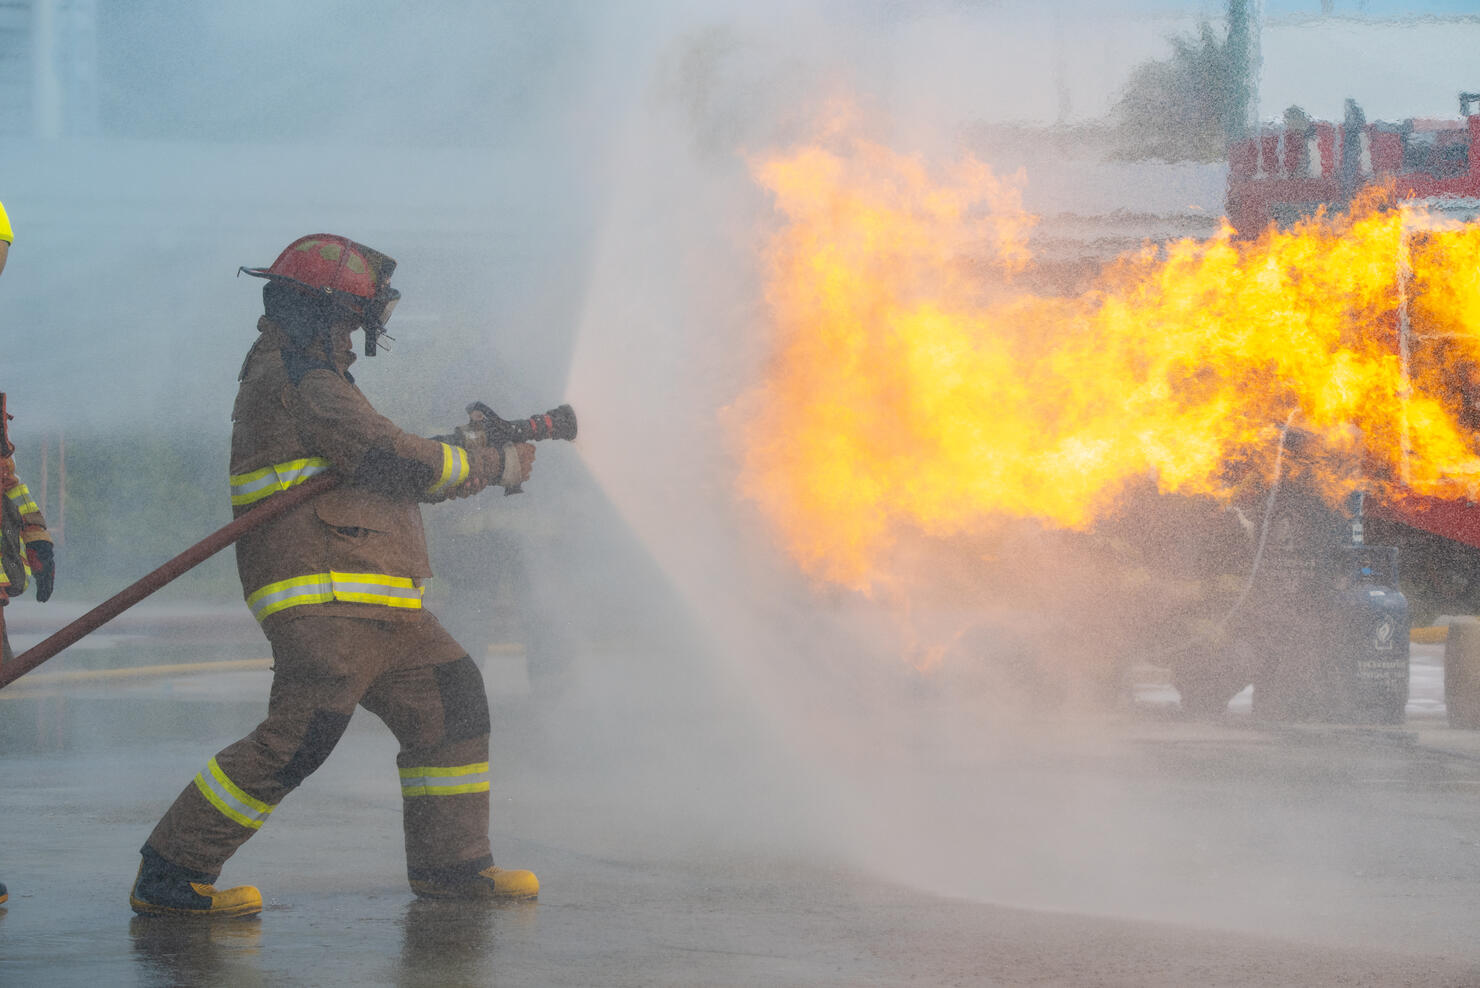 Firefighter spraying water at a house fire